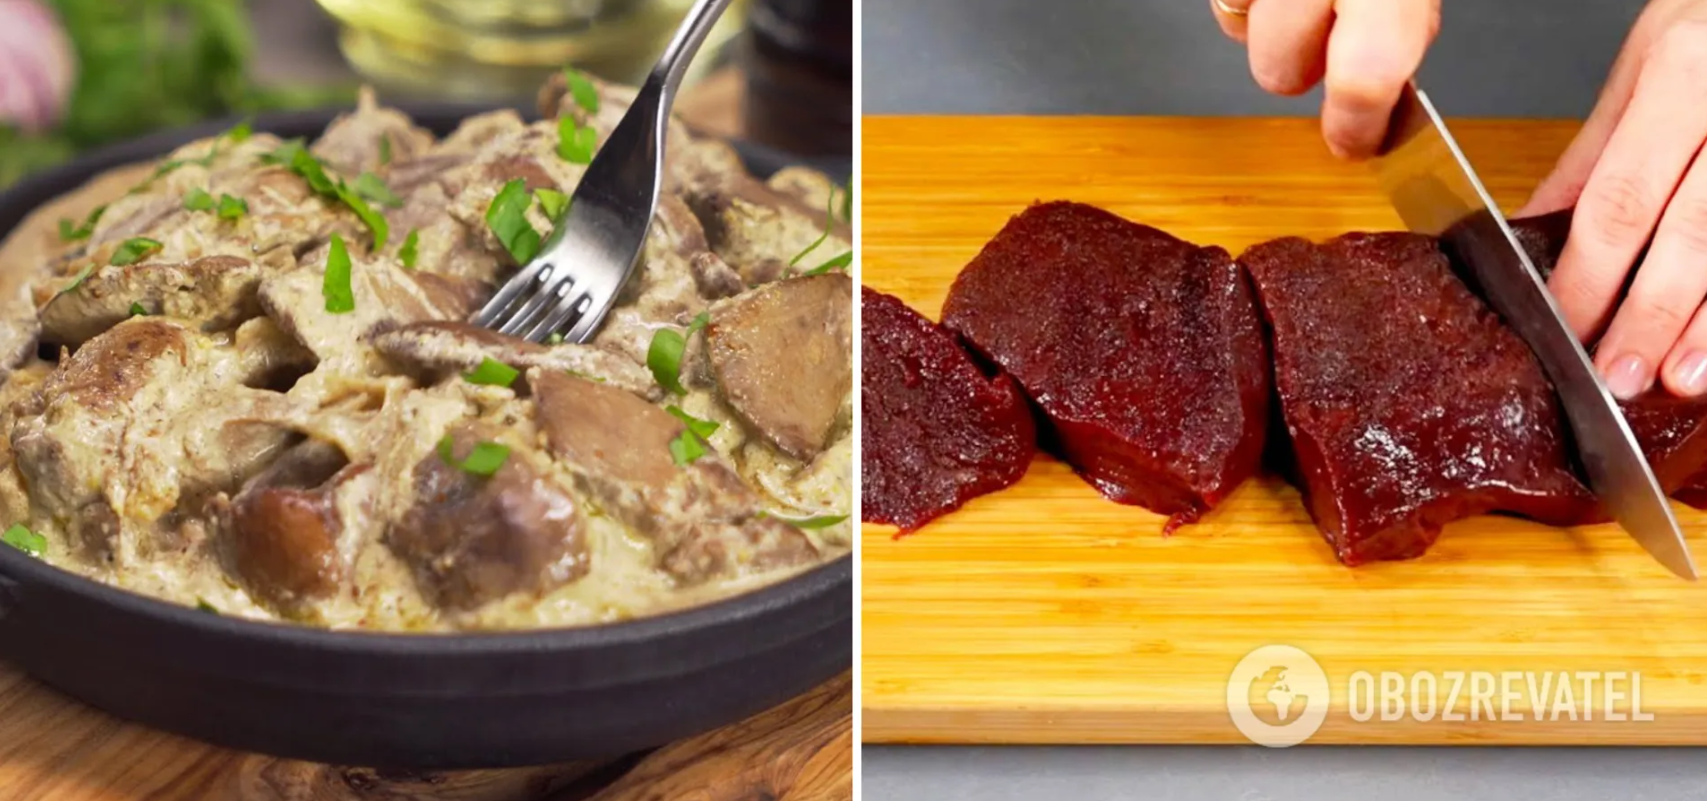 How to cook liver deliciously